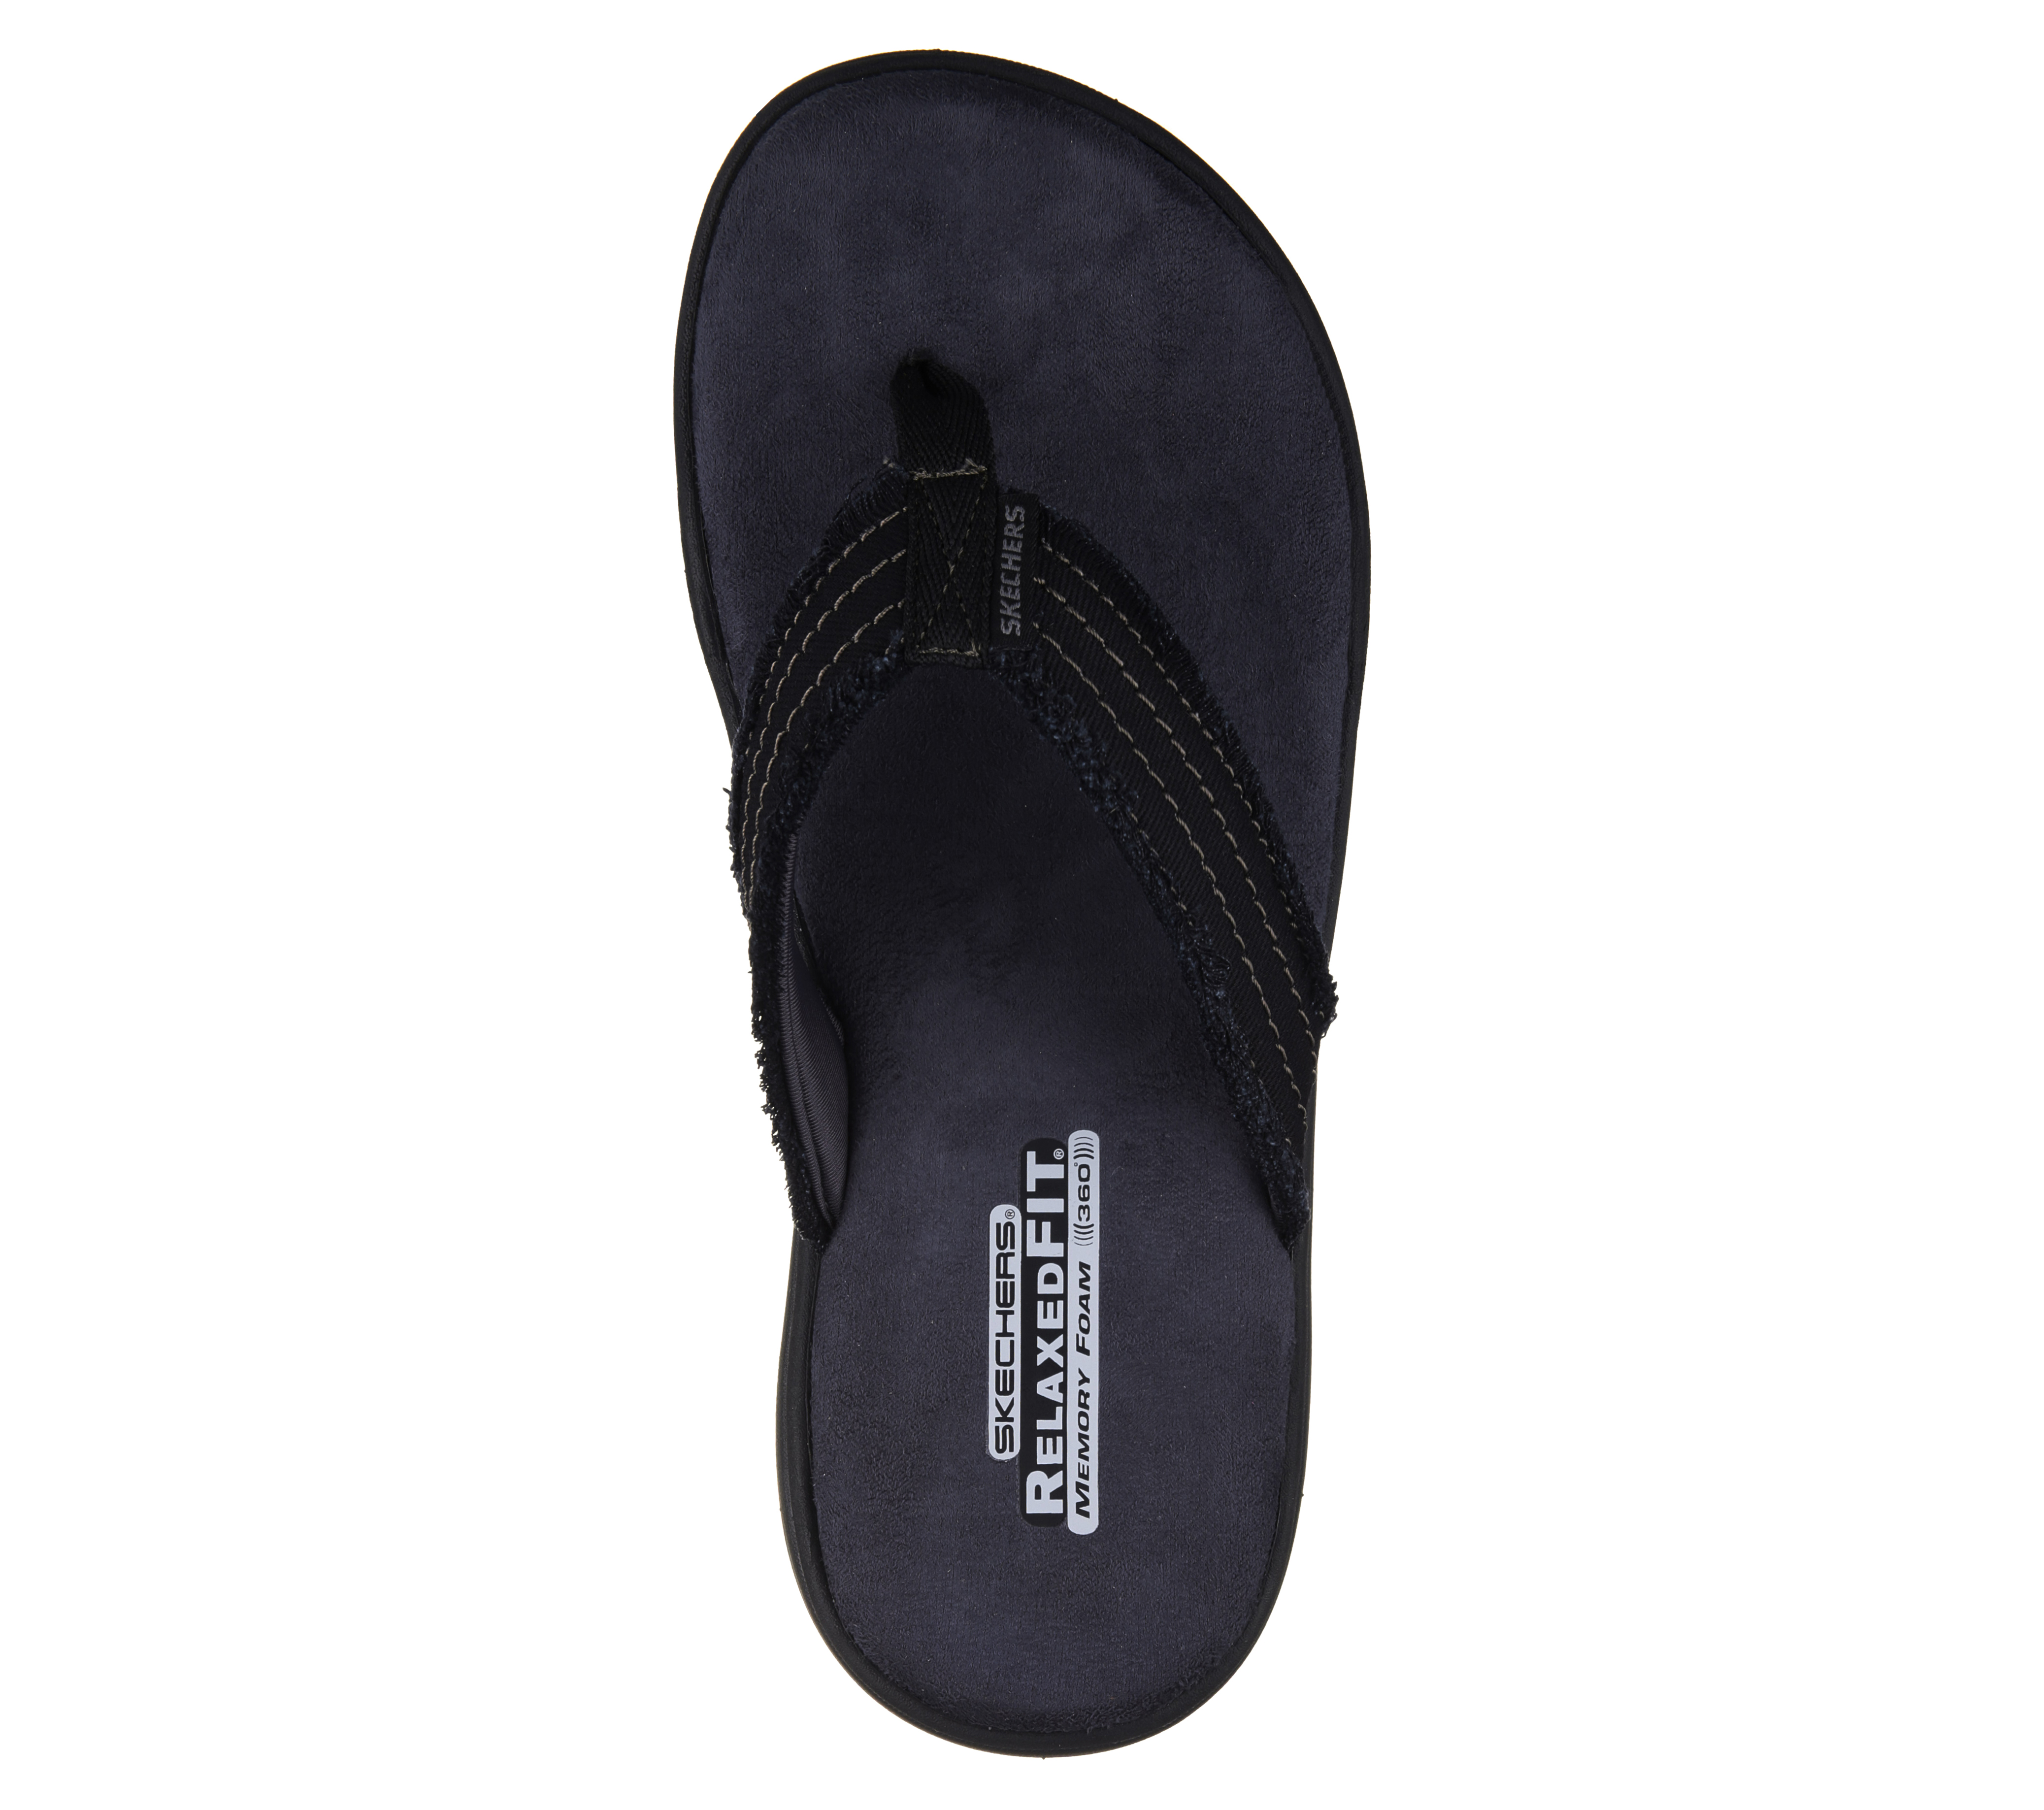 llamar Solenoide Universal Relaxed Fit: Evented - Arven | SKECHERS